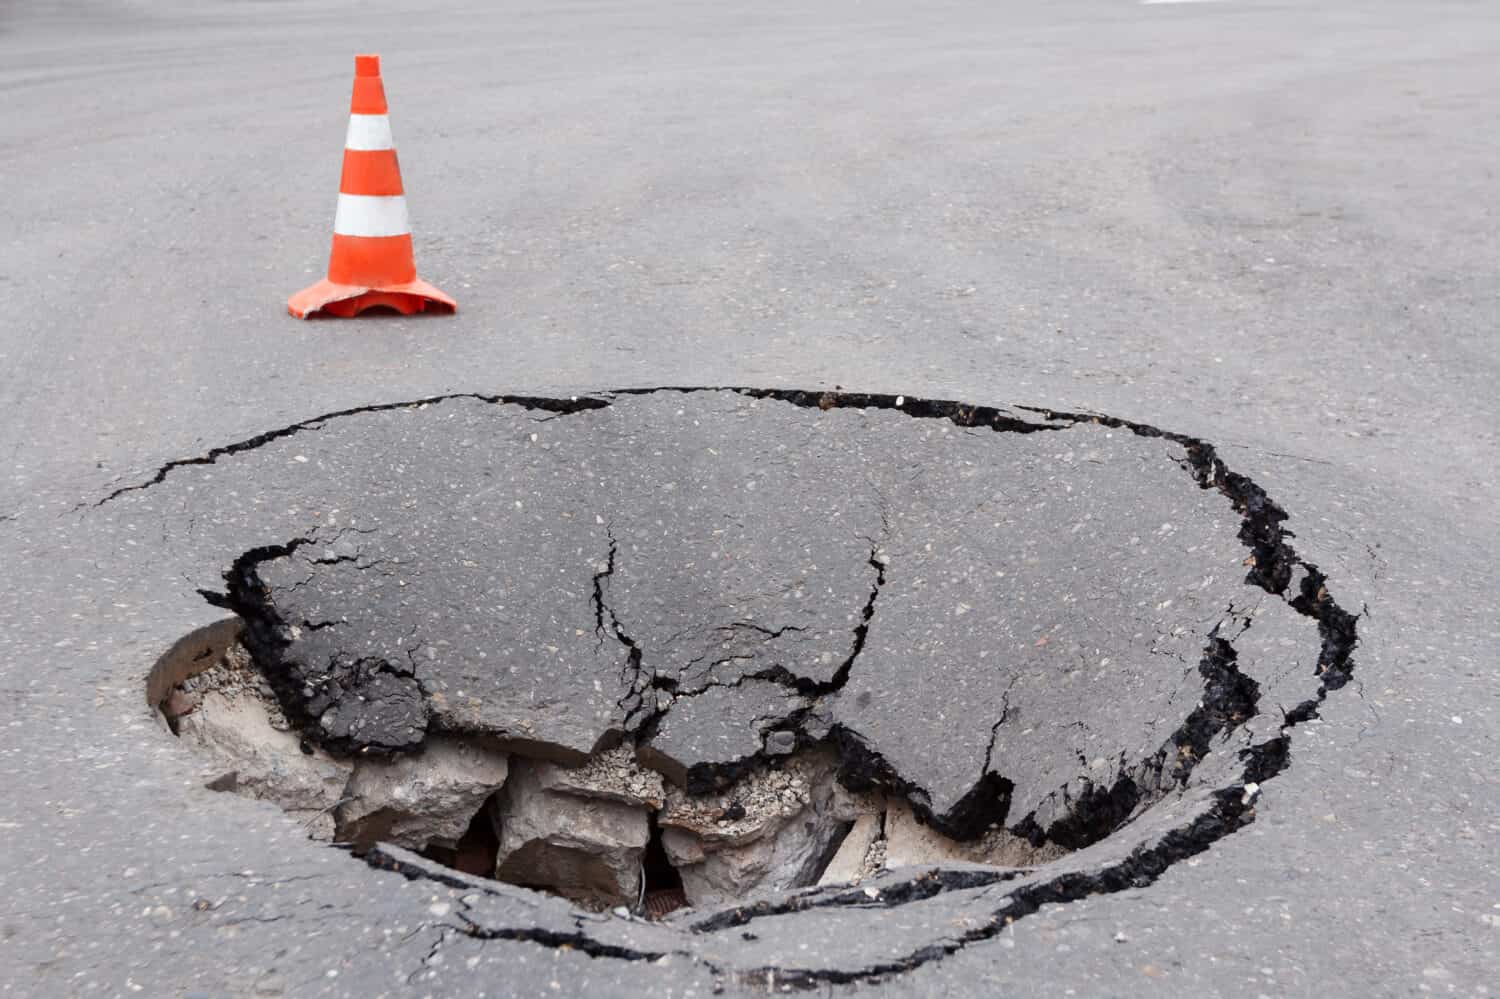 Deep sinkhole on a street city and orange traffic cone. Dangerous hole in the asphalt highway. Road with cracks. Bad construction. Damaged asphalt road collapse and fallen. 